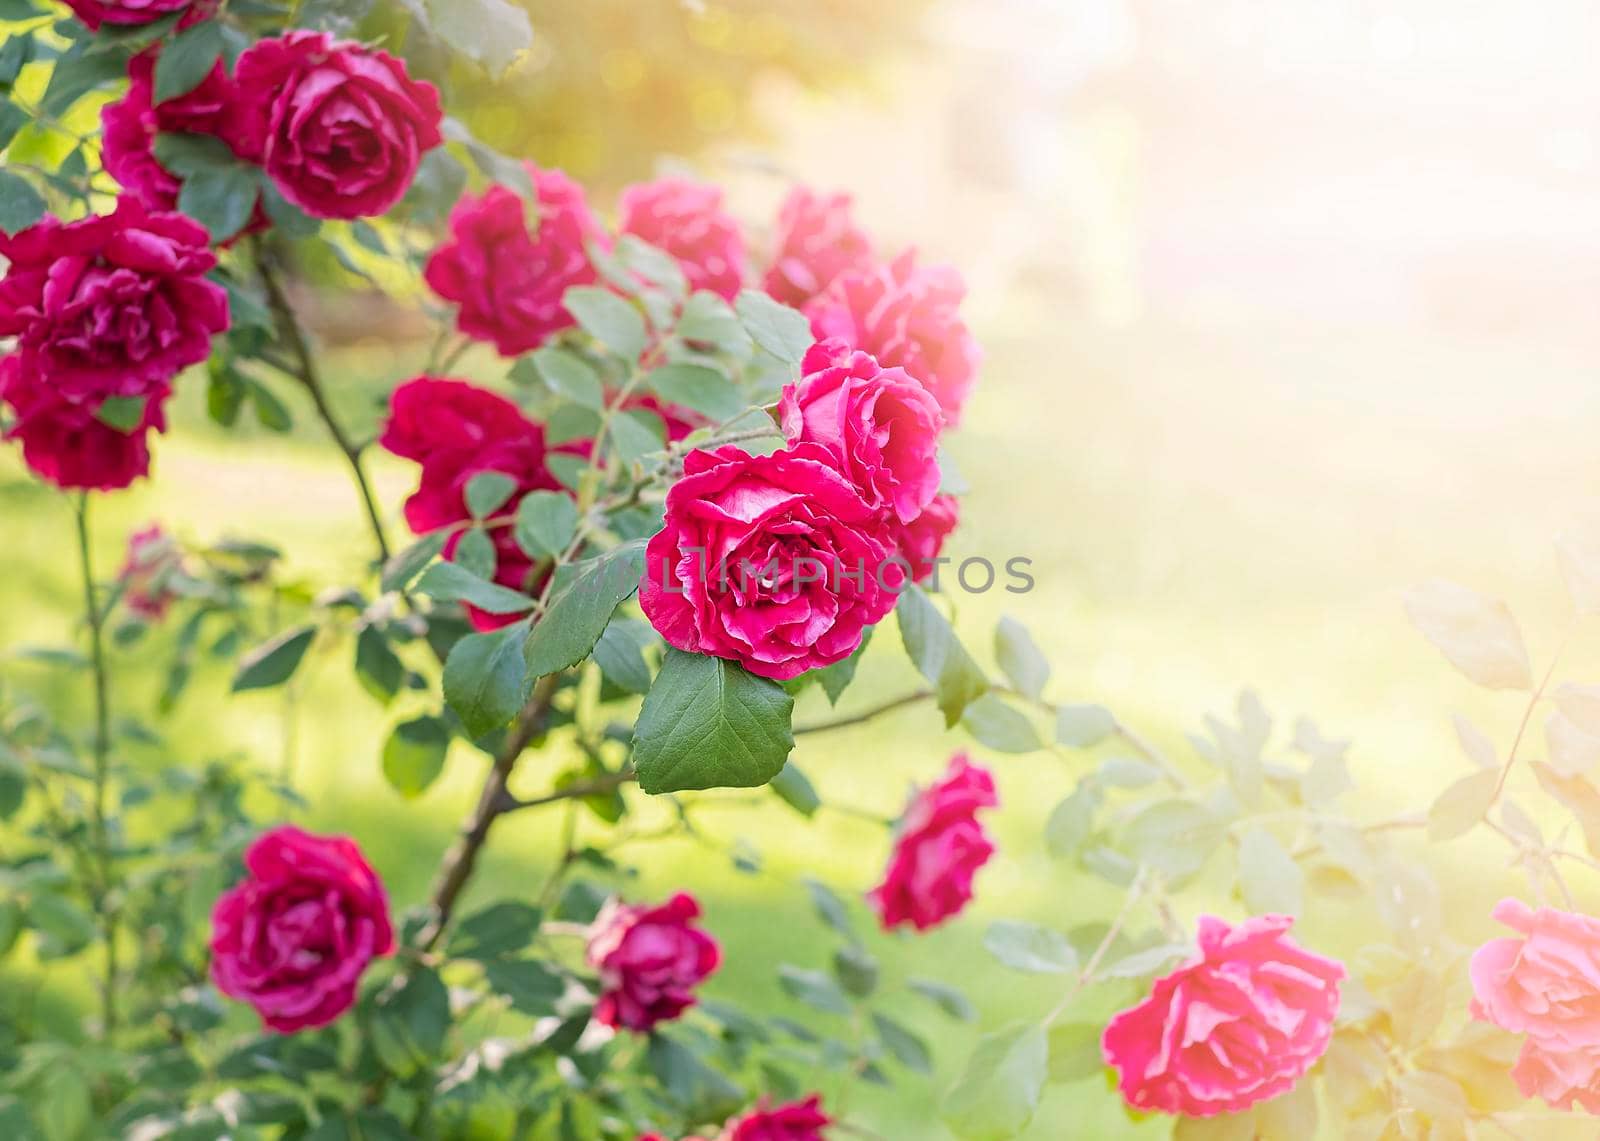 bush pink Roses in the garden in the sun with copy space by Annavish